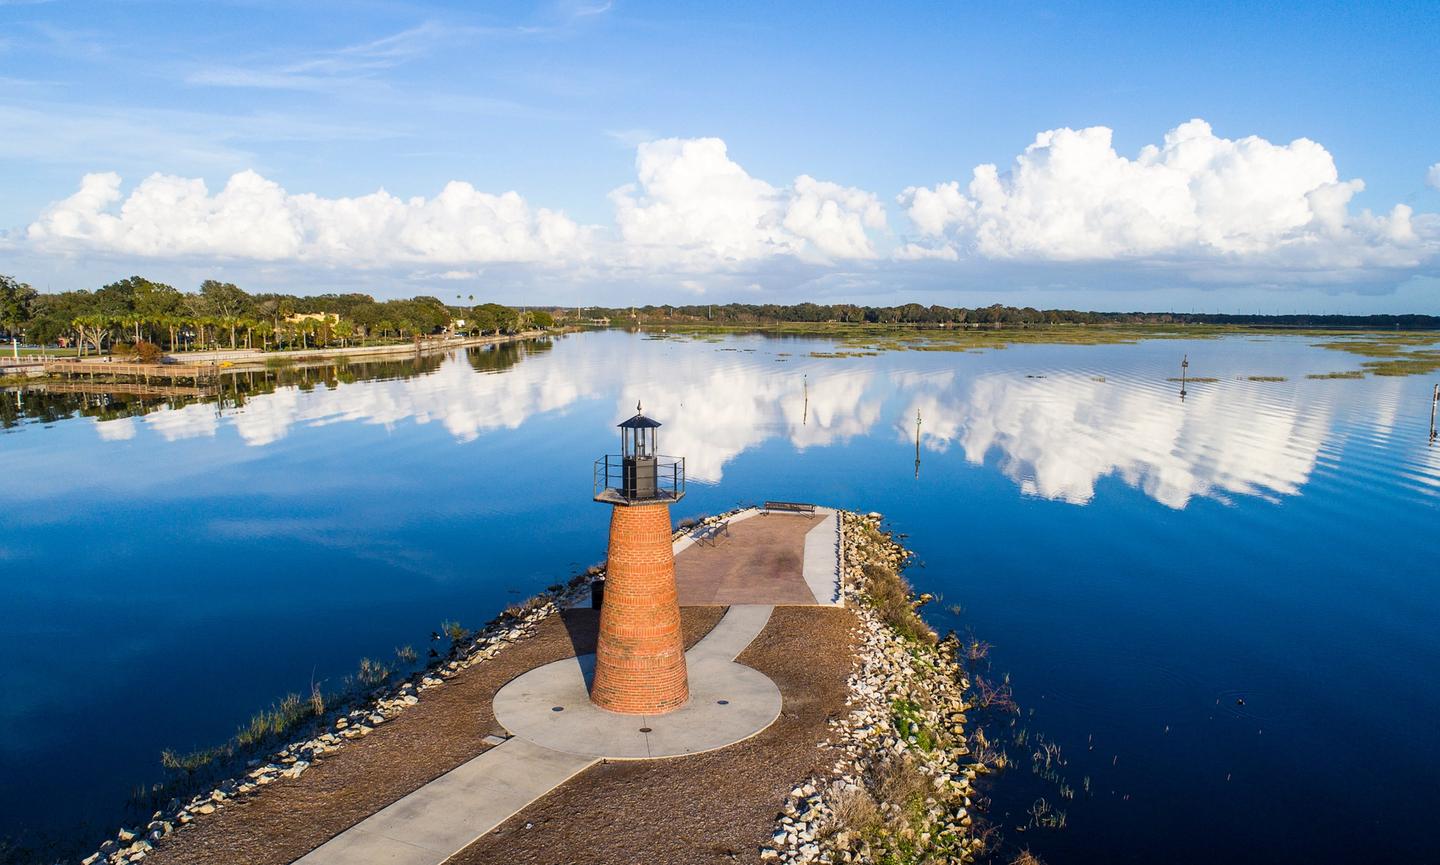 Scenic lighthouse views welcome visitors to Kissimmee Lakefront Park. Other nearby amenities include a fishing pier, a fish and wildlife observation area, picnic areas, concessions and playgrounds.